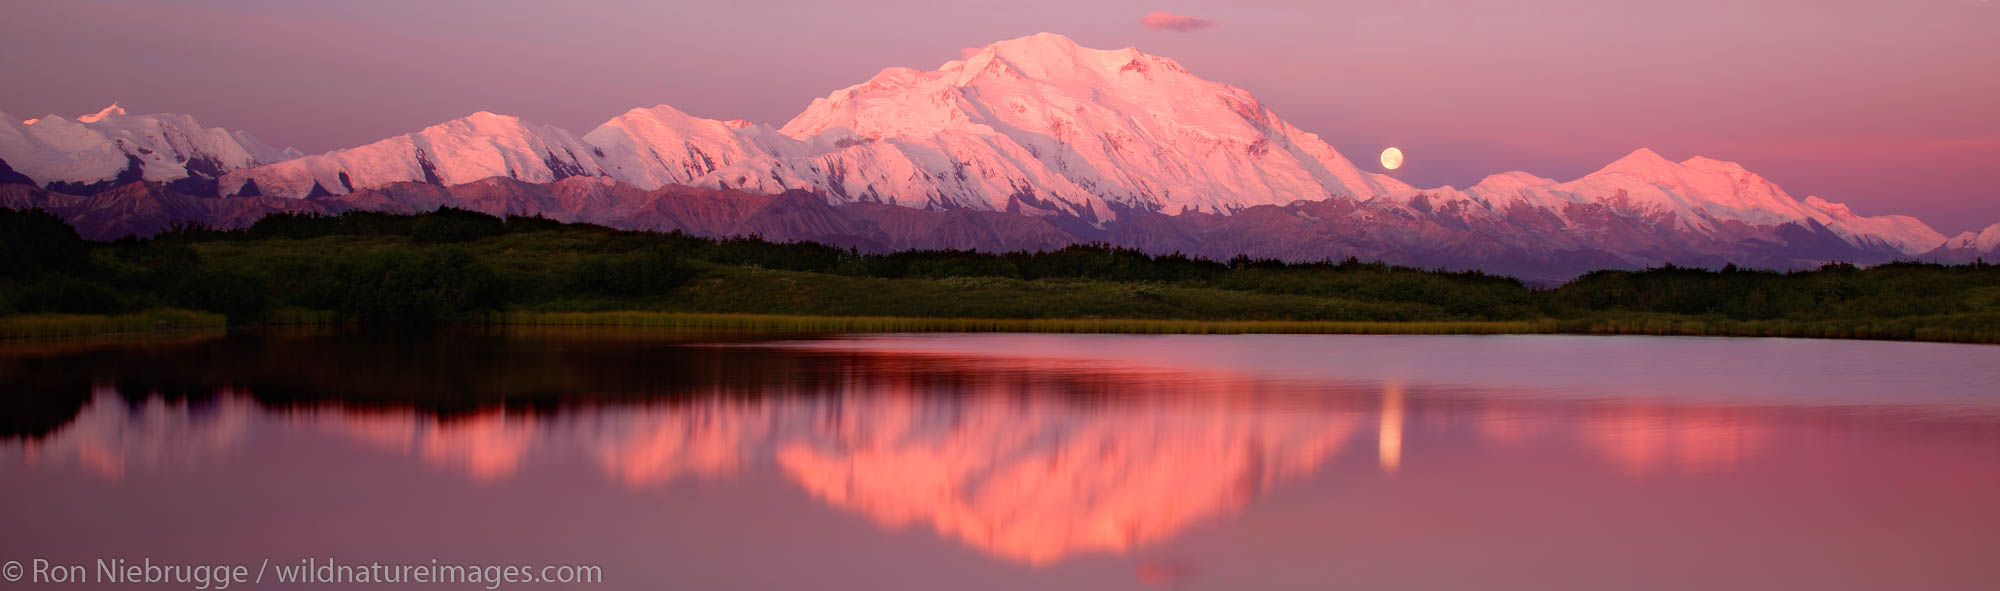 The full moon and Mt. McKinley from Reflection Pond, Denali National Park, Alaska.